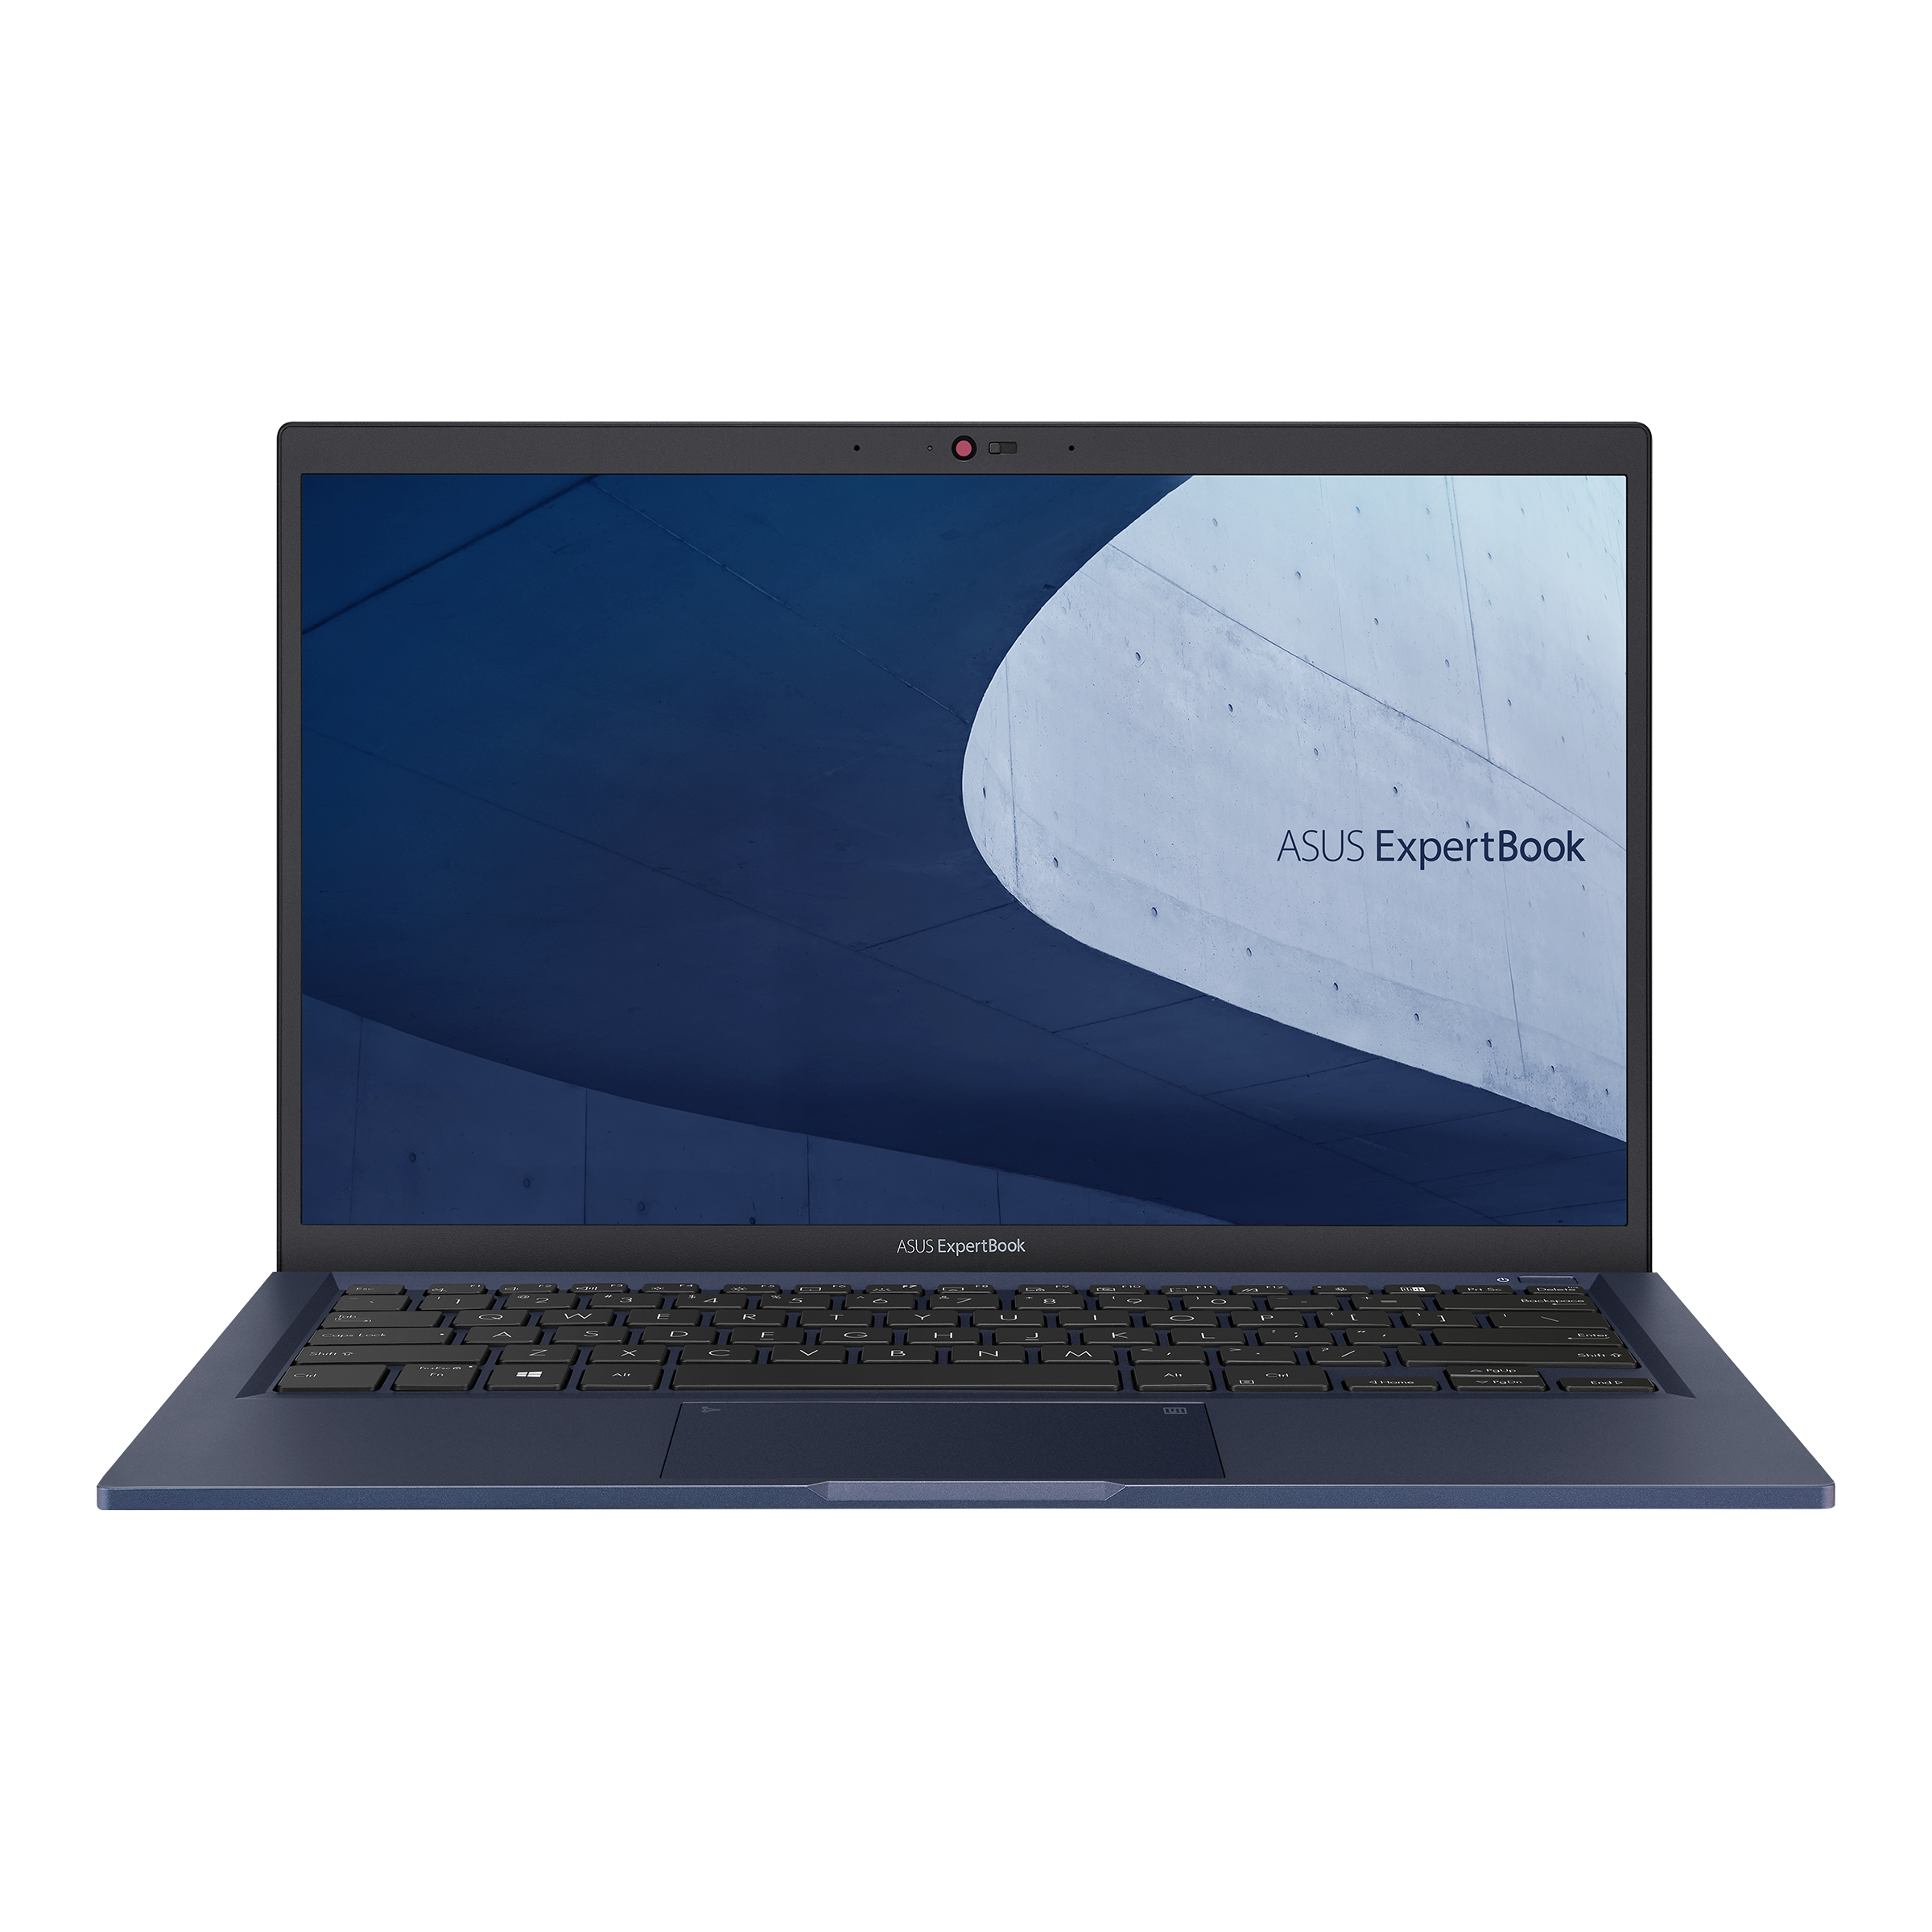 ExpertBook B1 B1400｜Laptops For Work｜ASUS Indonesia